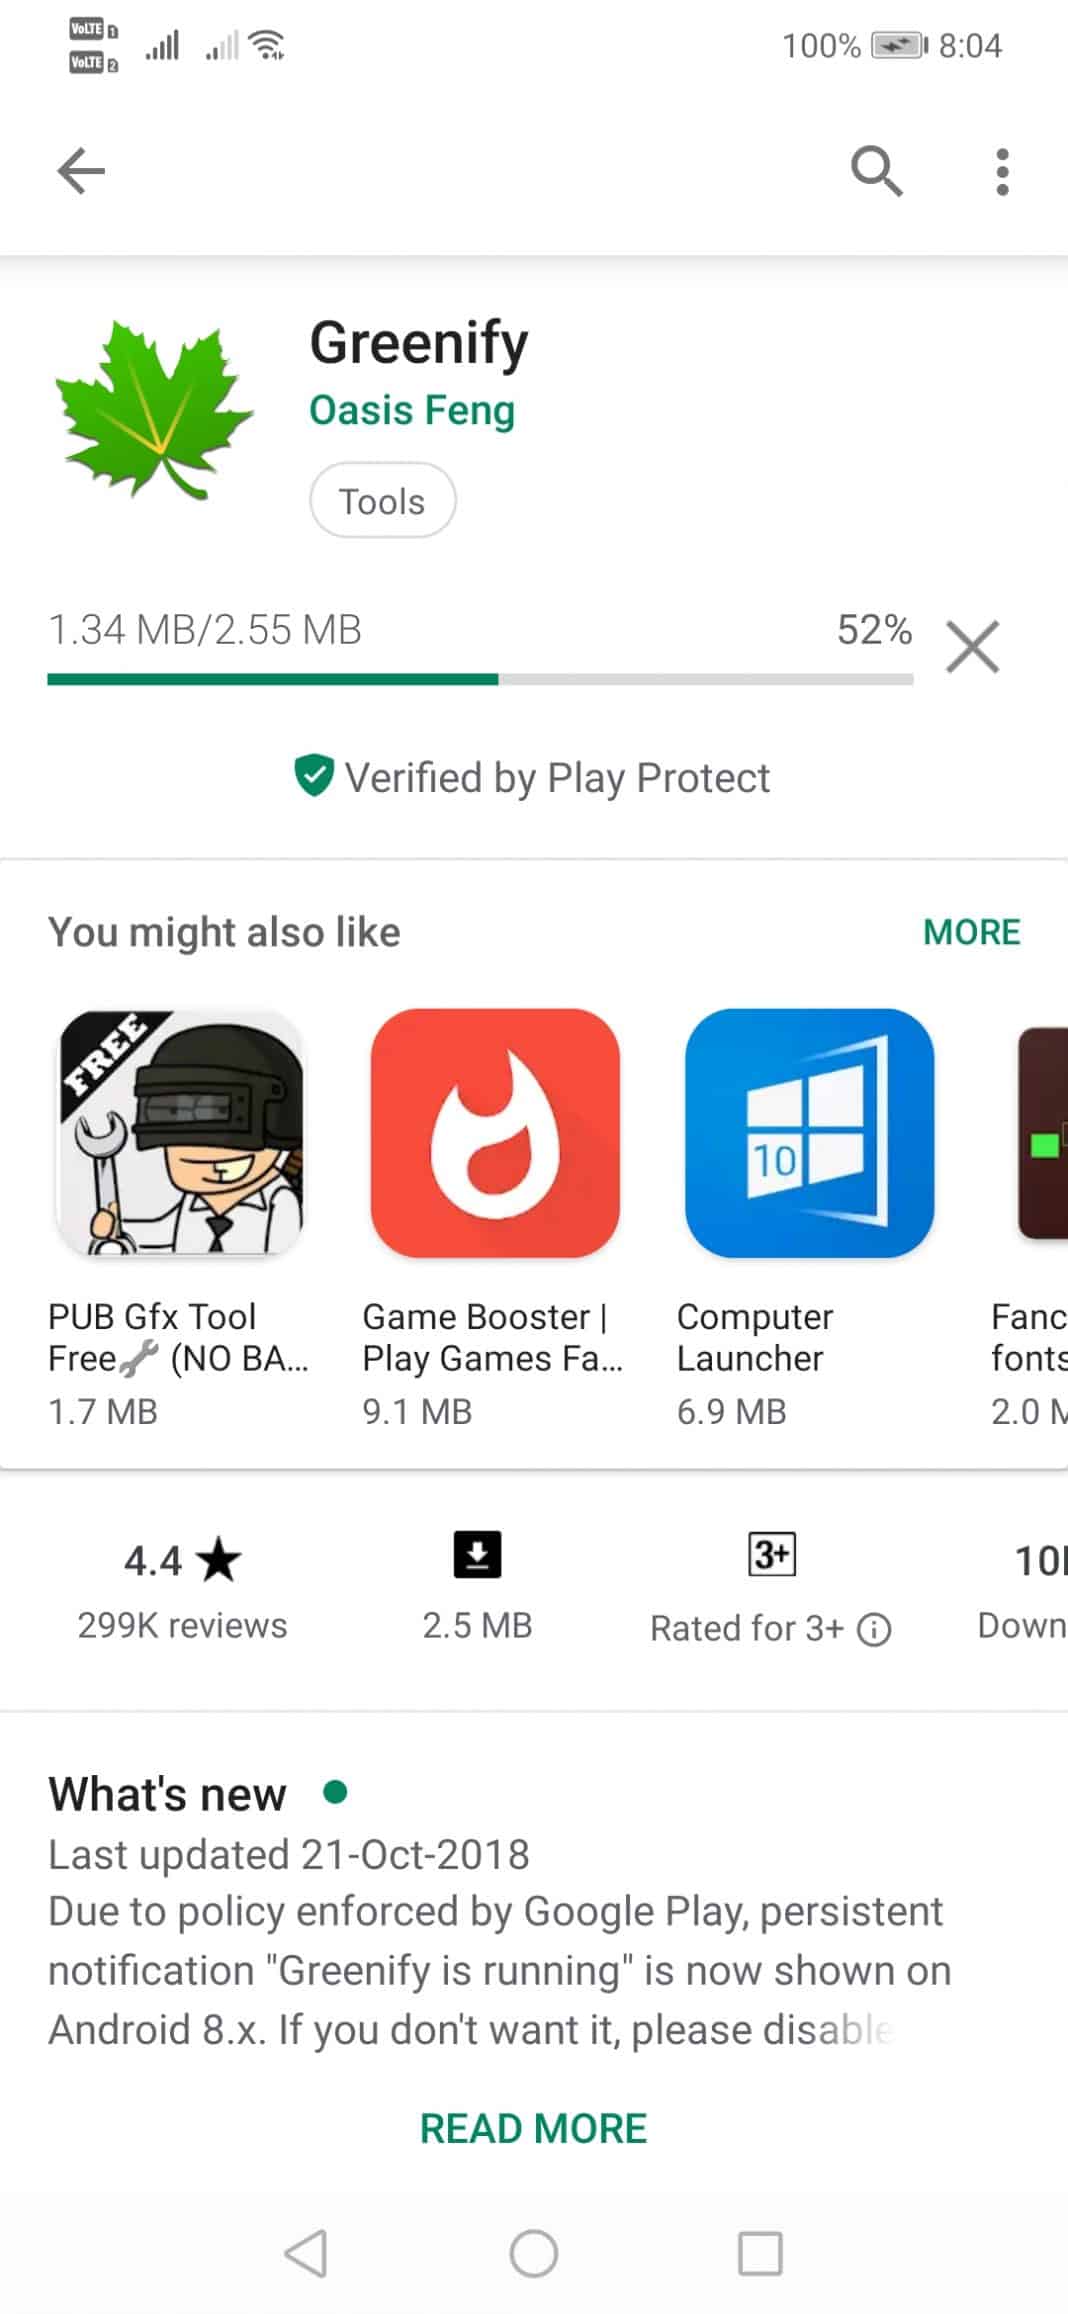 Install Greenify on your Android